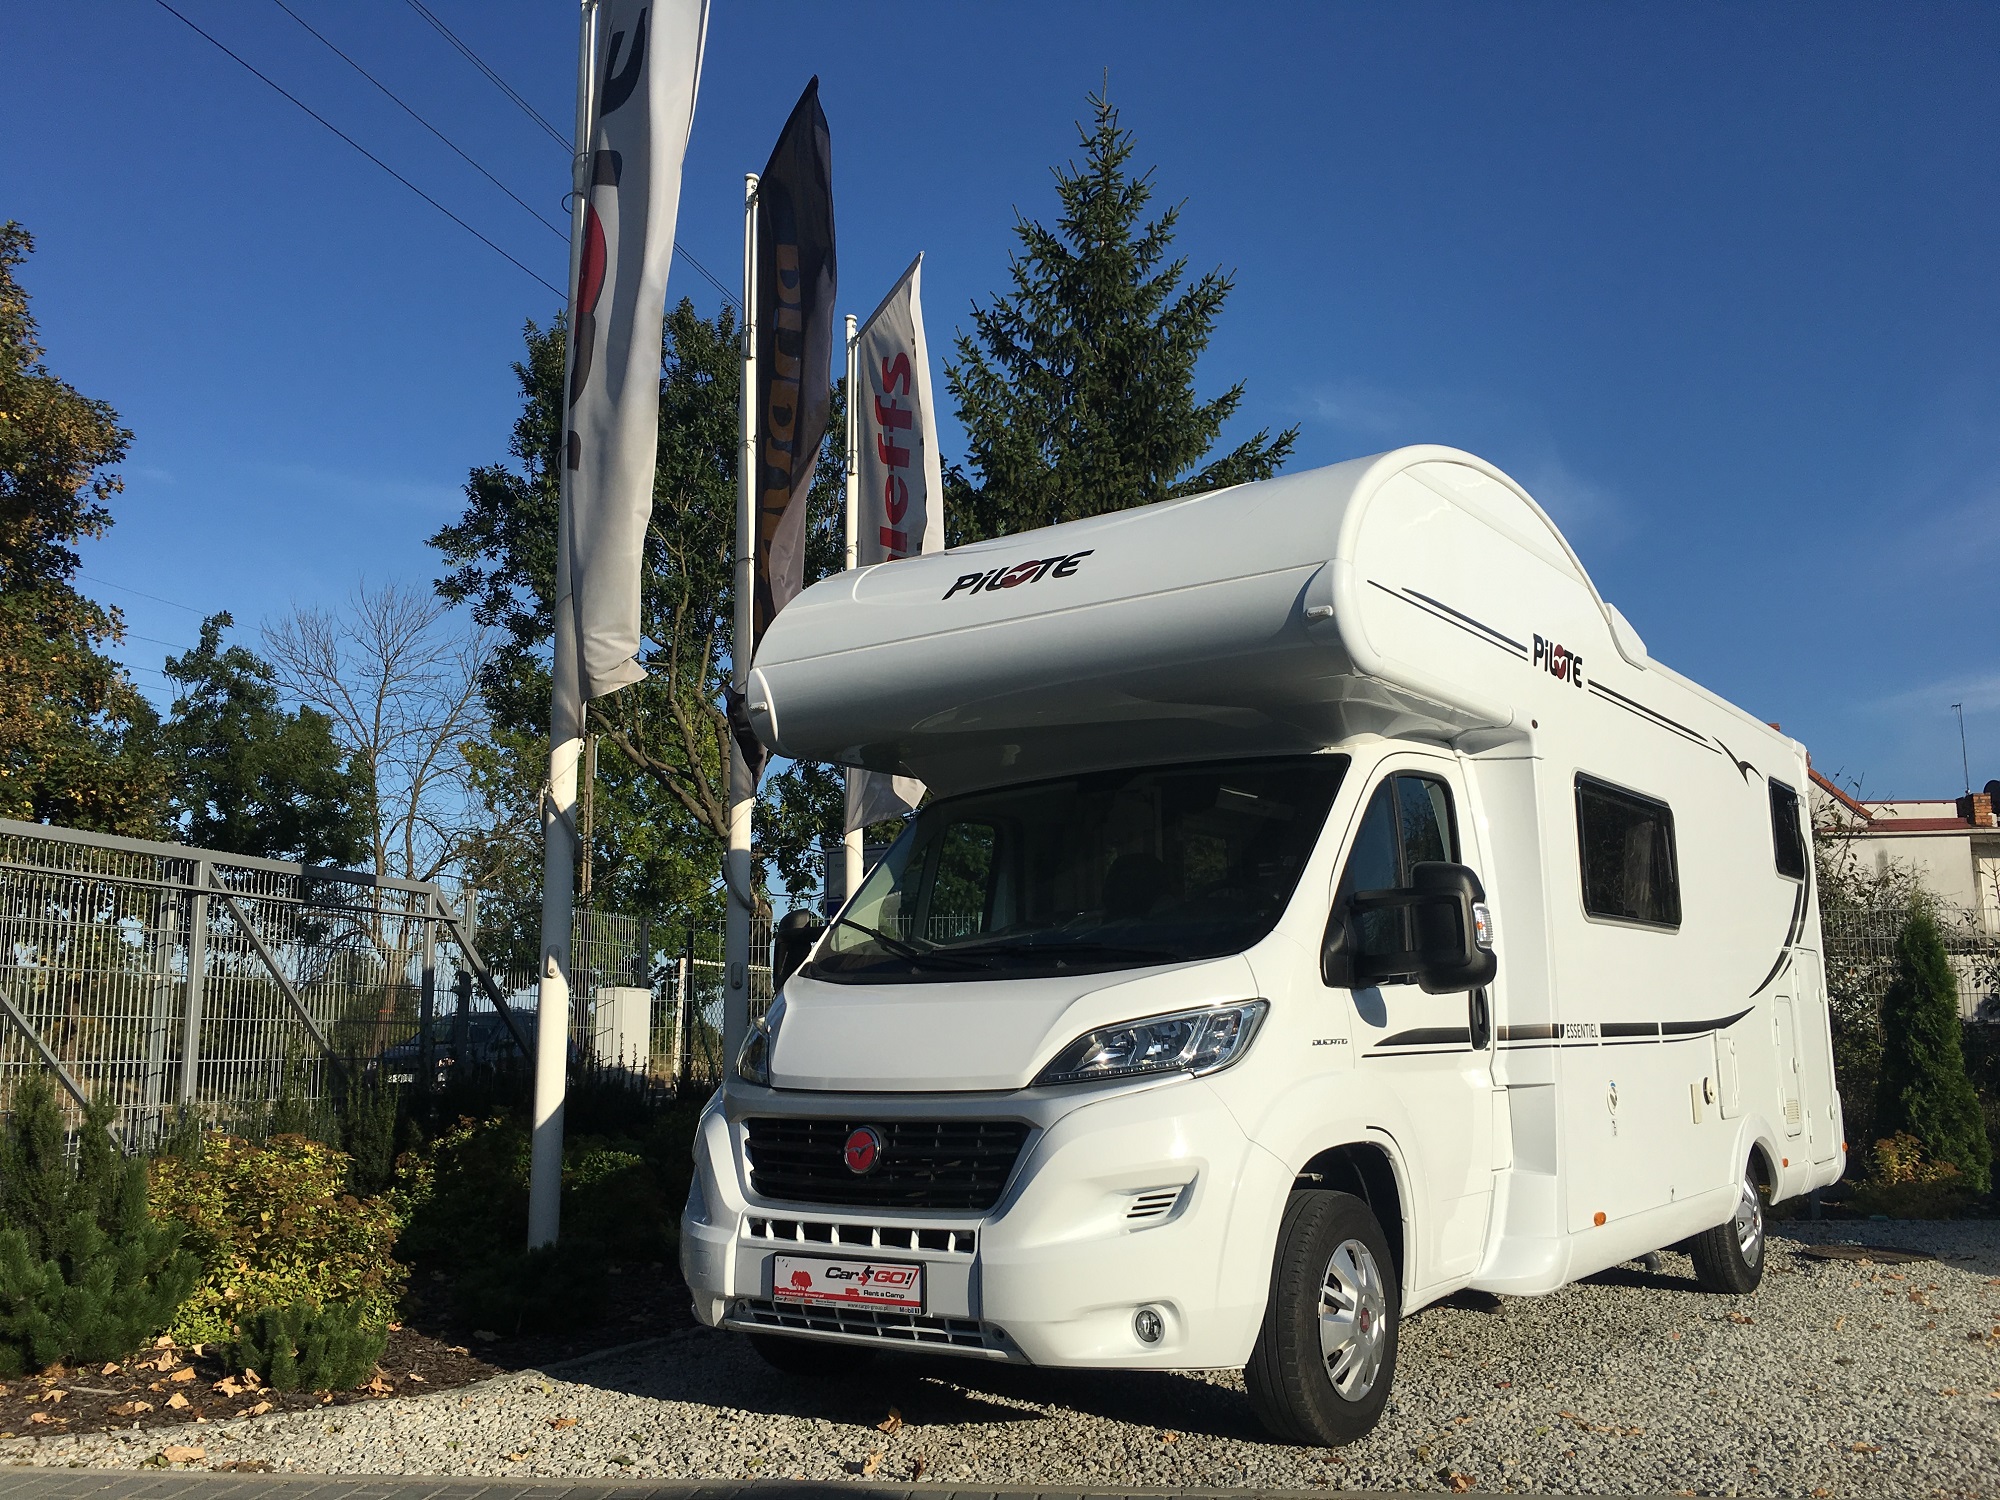 Family motorhome with an alcove by Pilote – main image